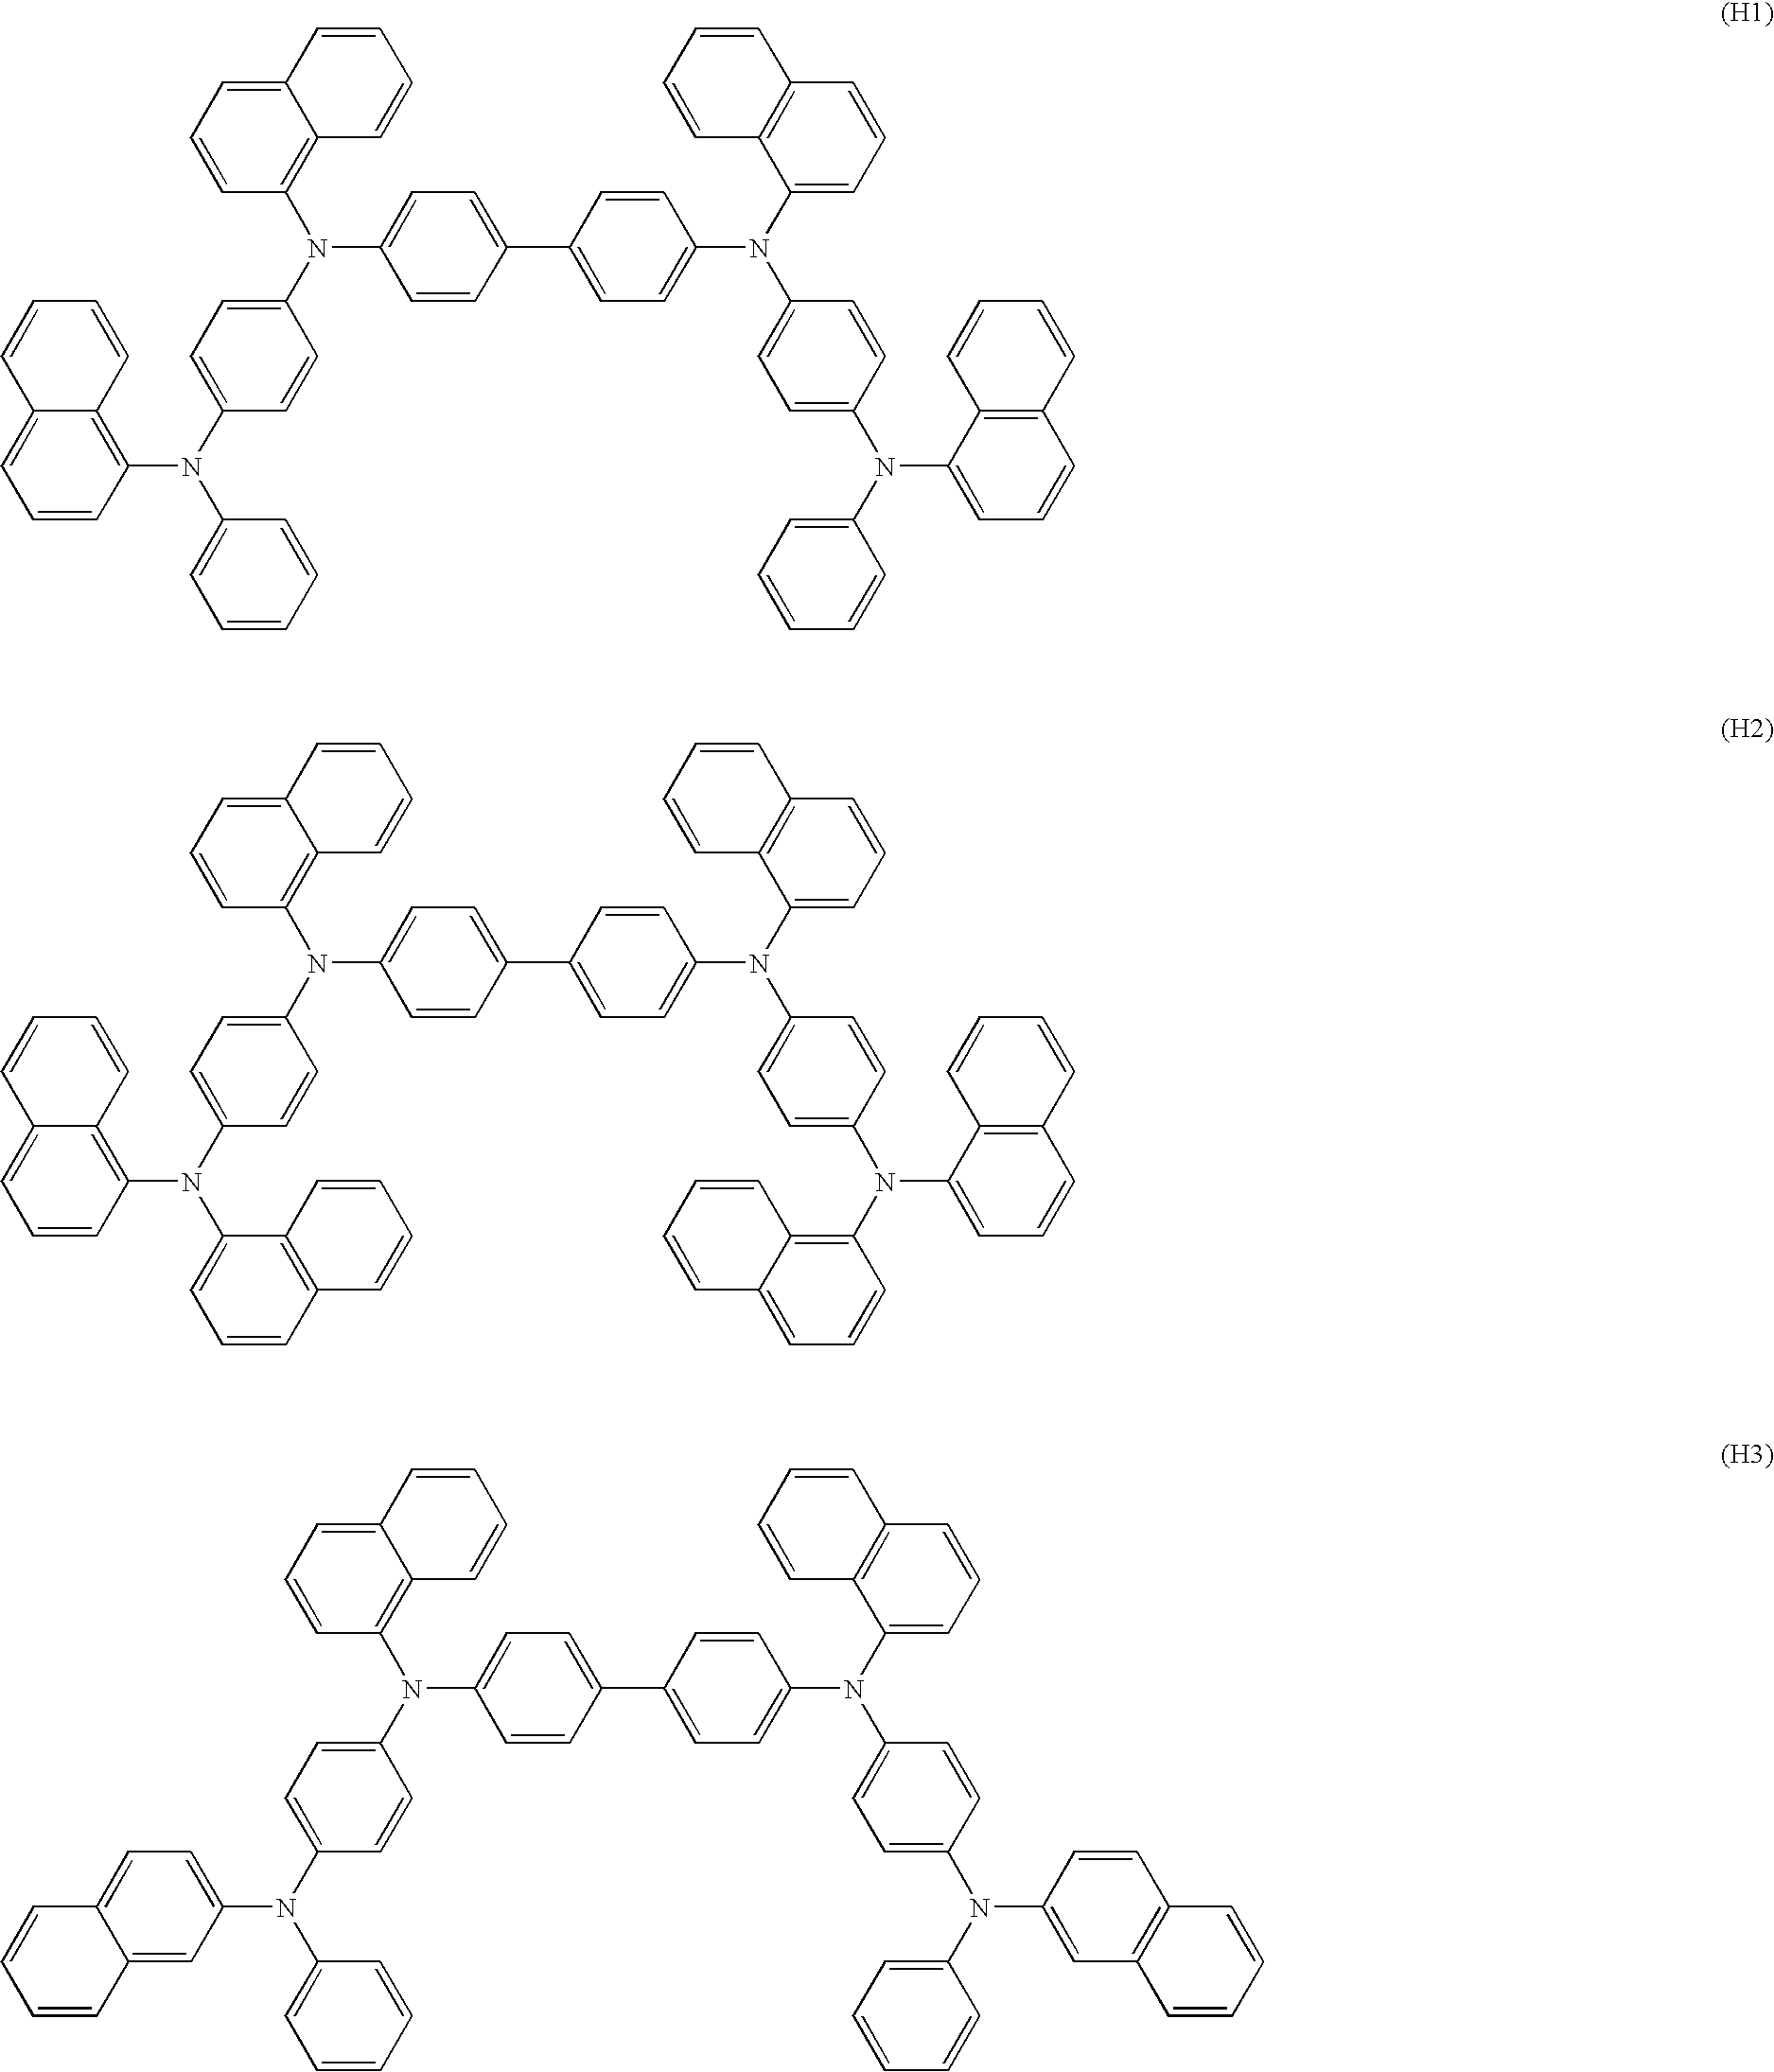 Aromatic amine derivative and organic electroluminescent element employing the same